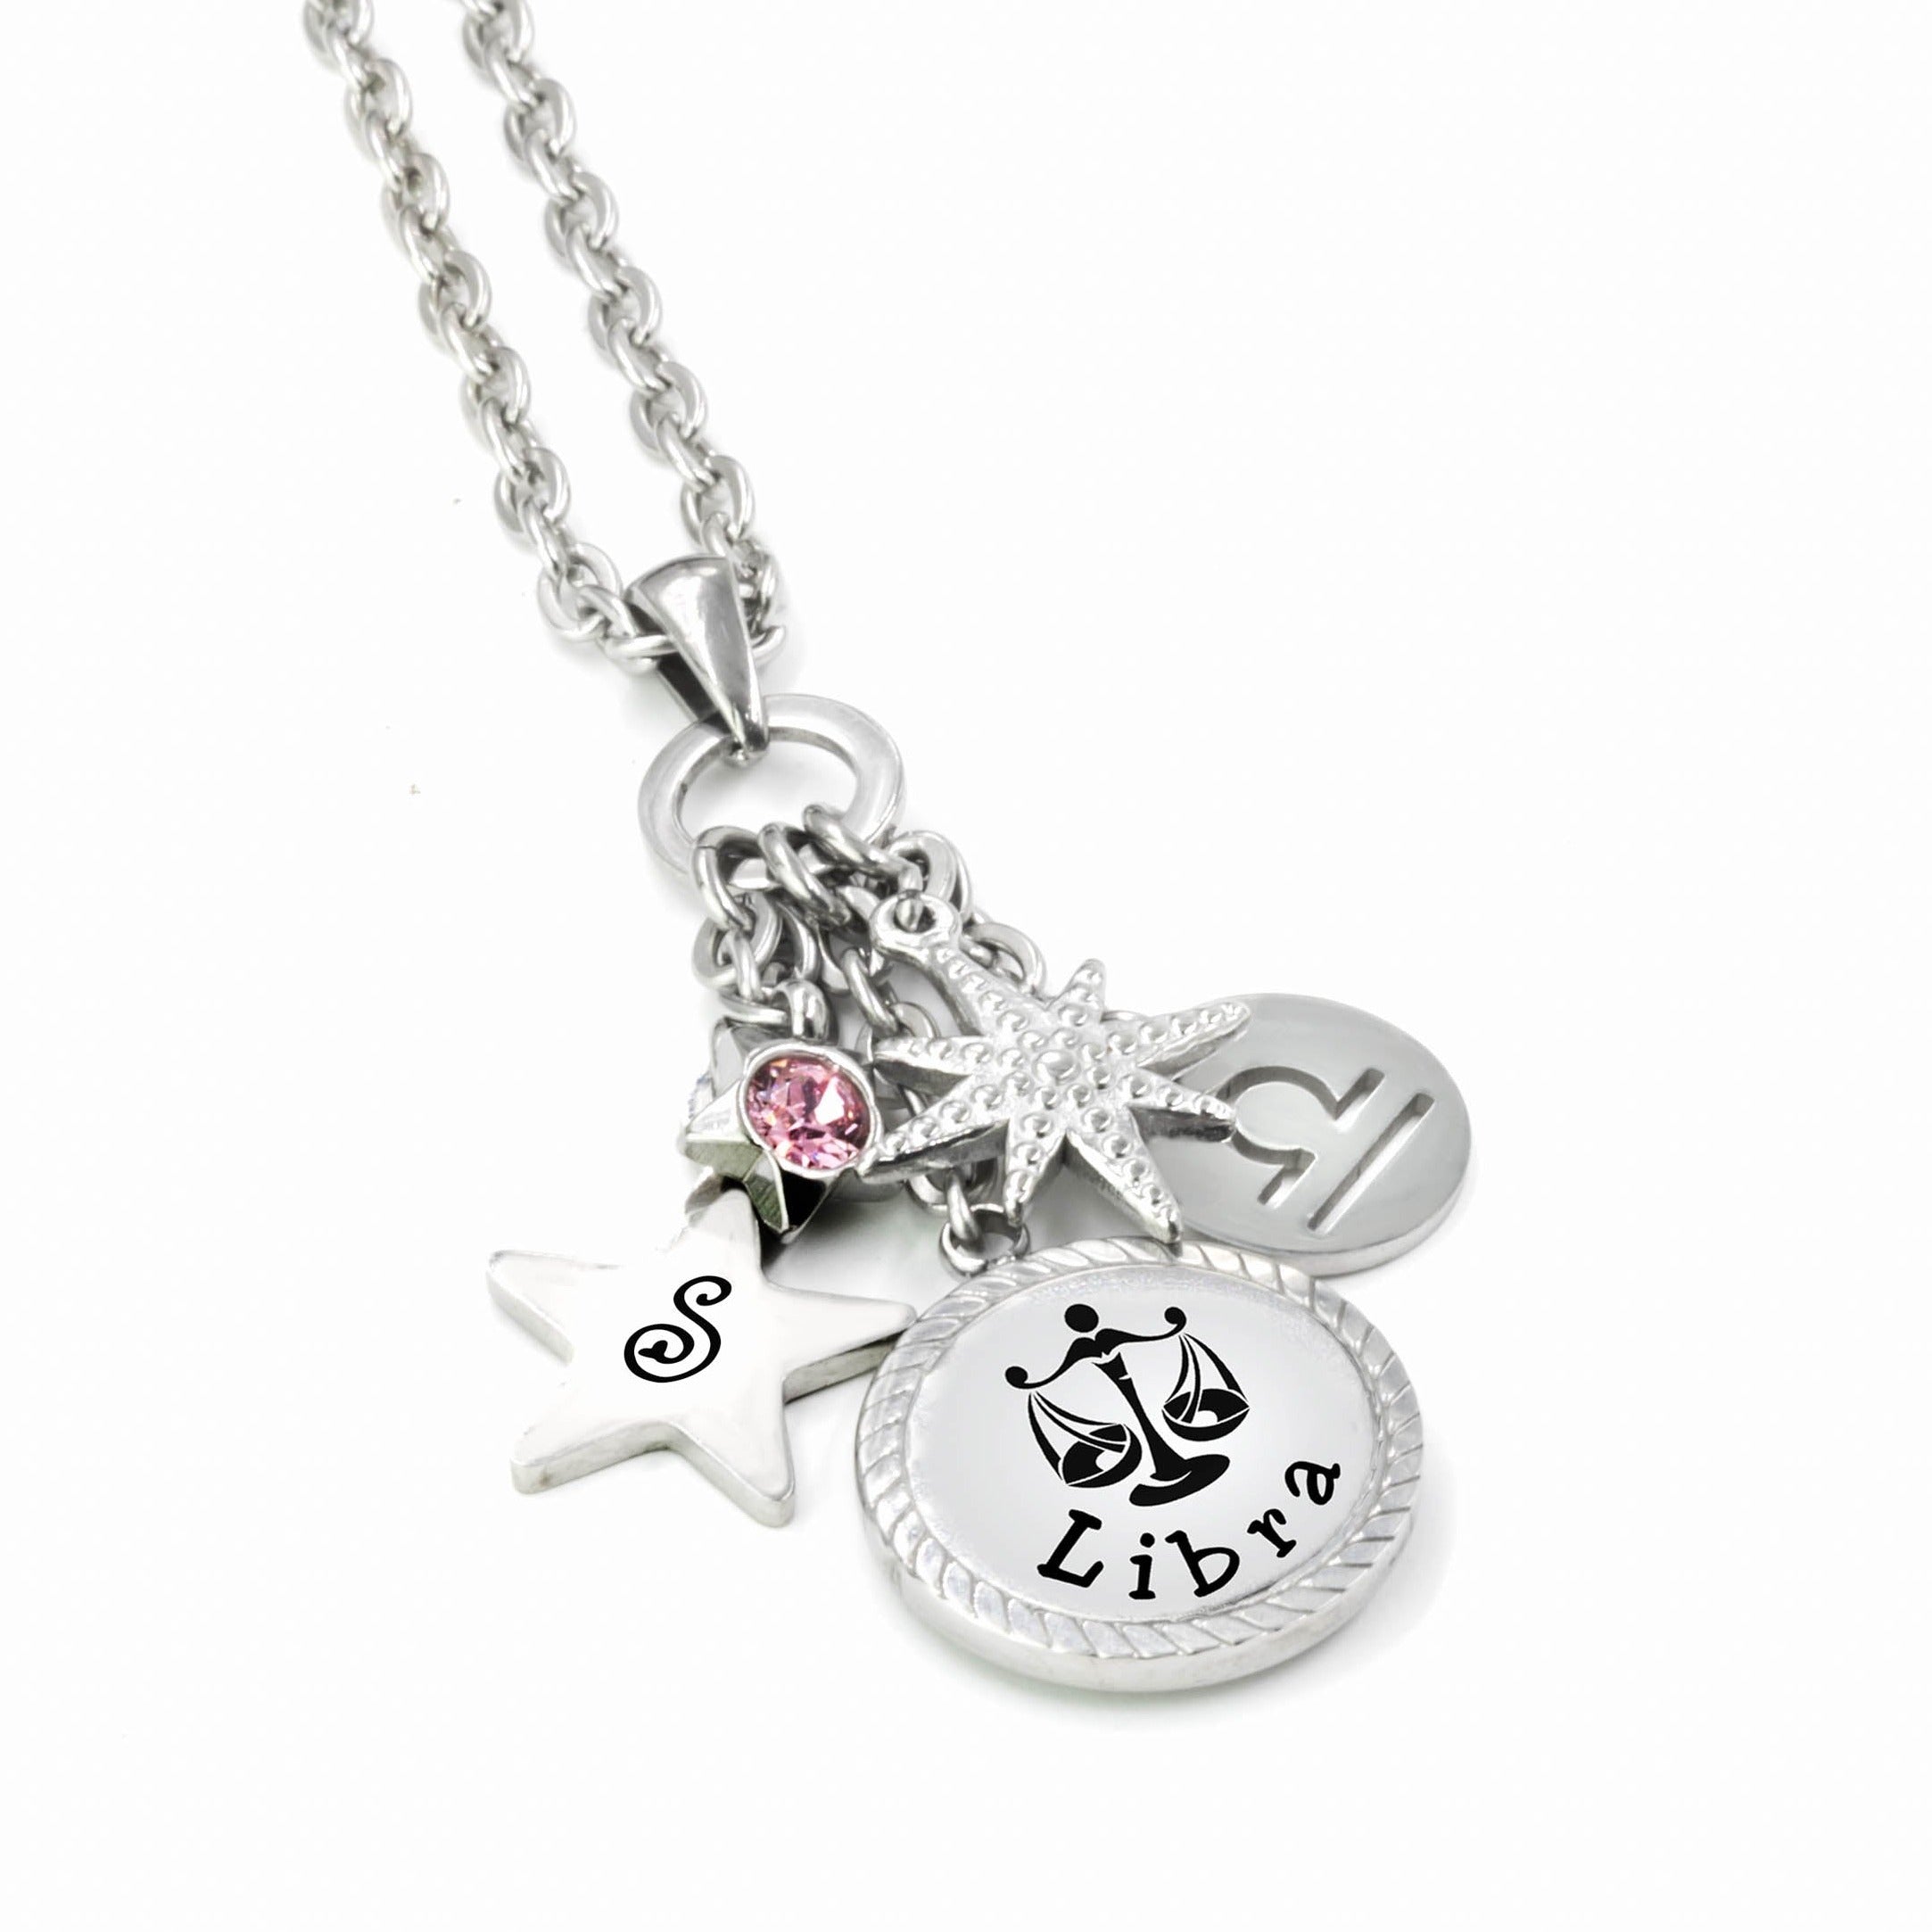 Engraved Libra Charm Necklace with Personalized Initial